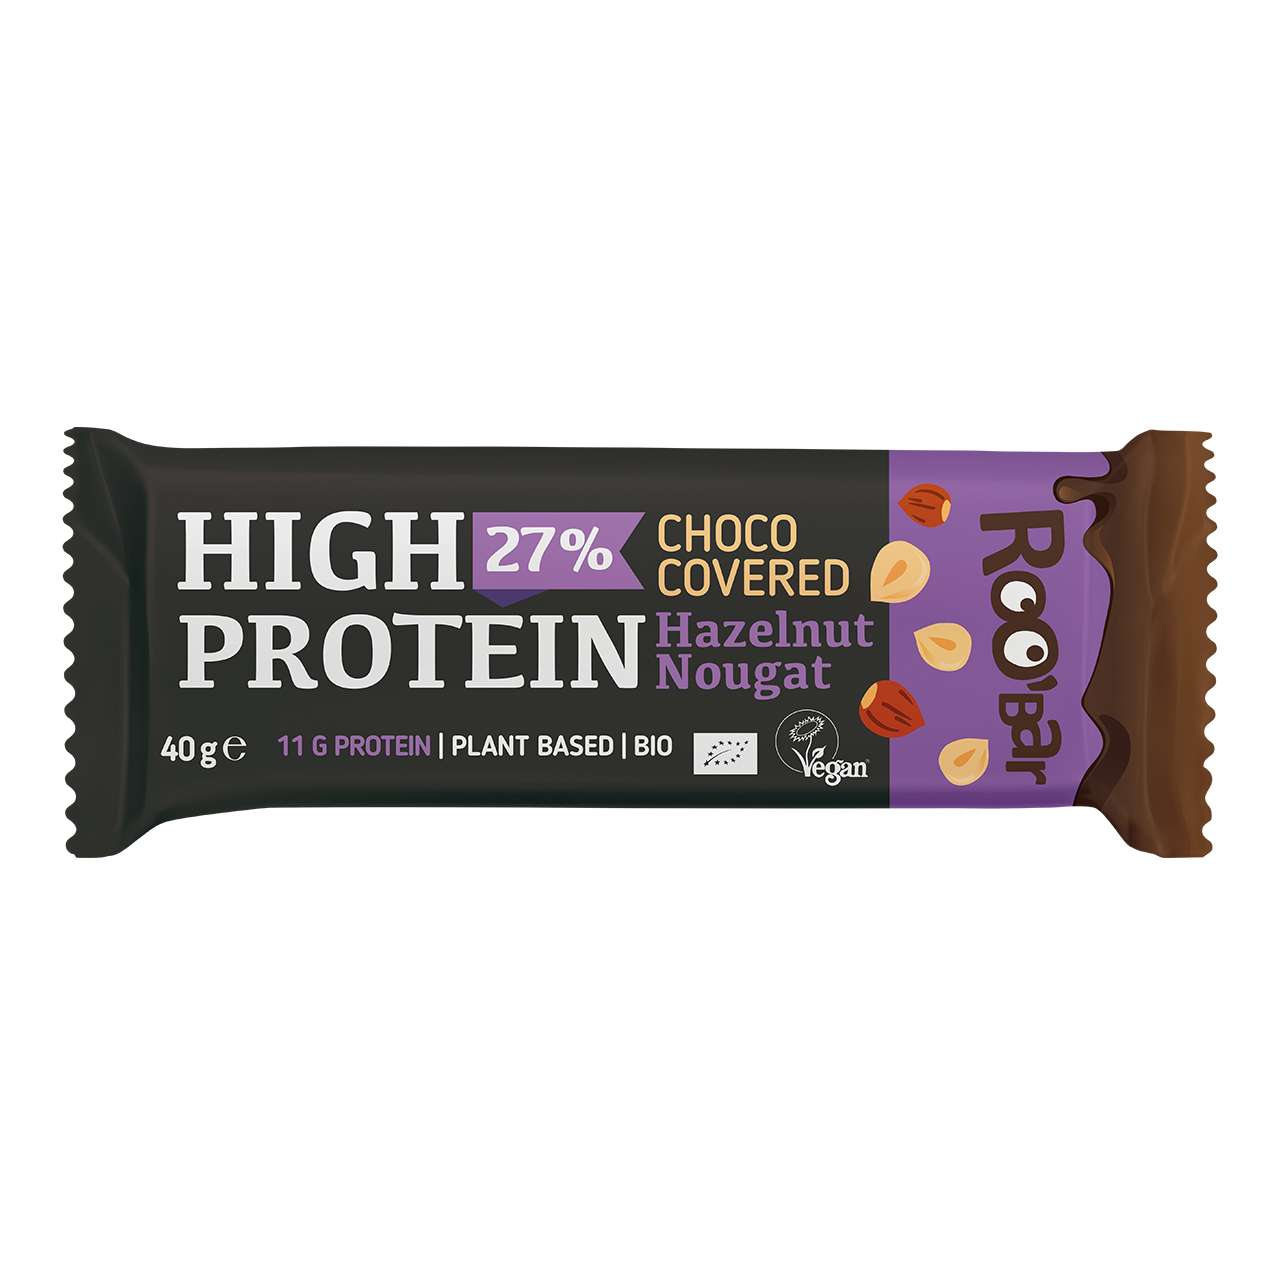 Choco_protein_Nougat_front-1